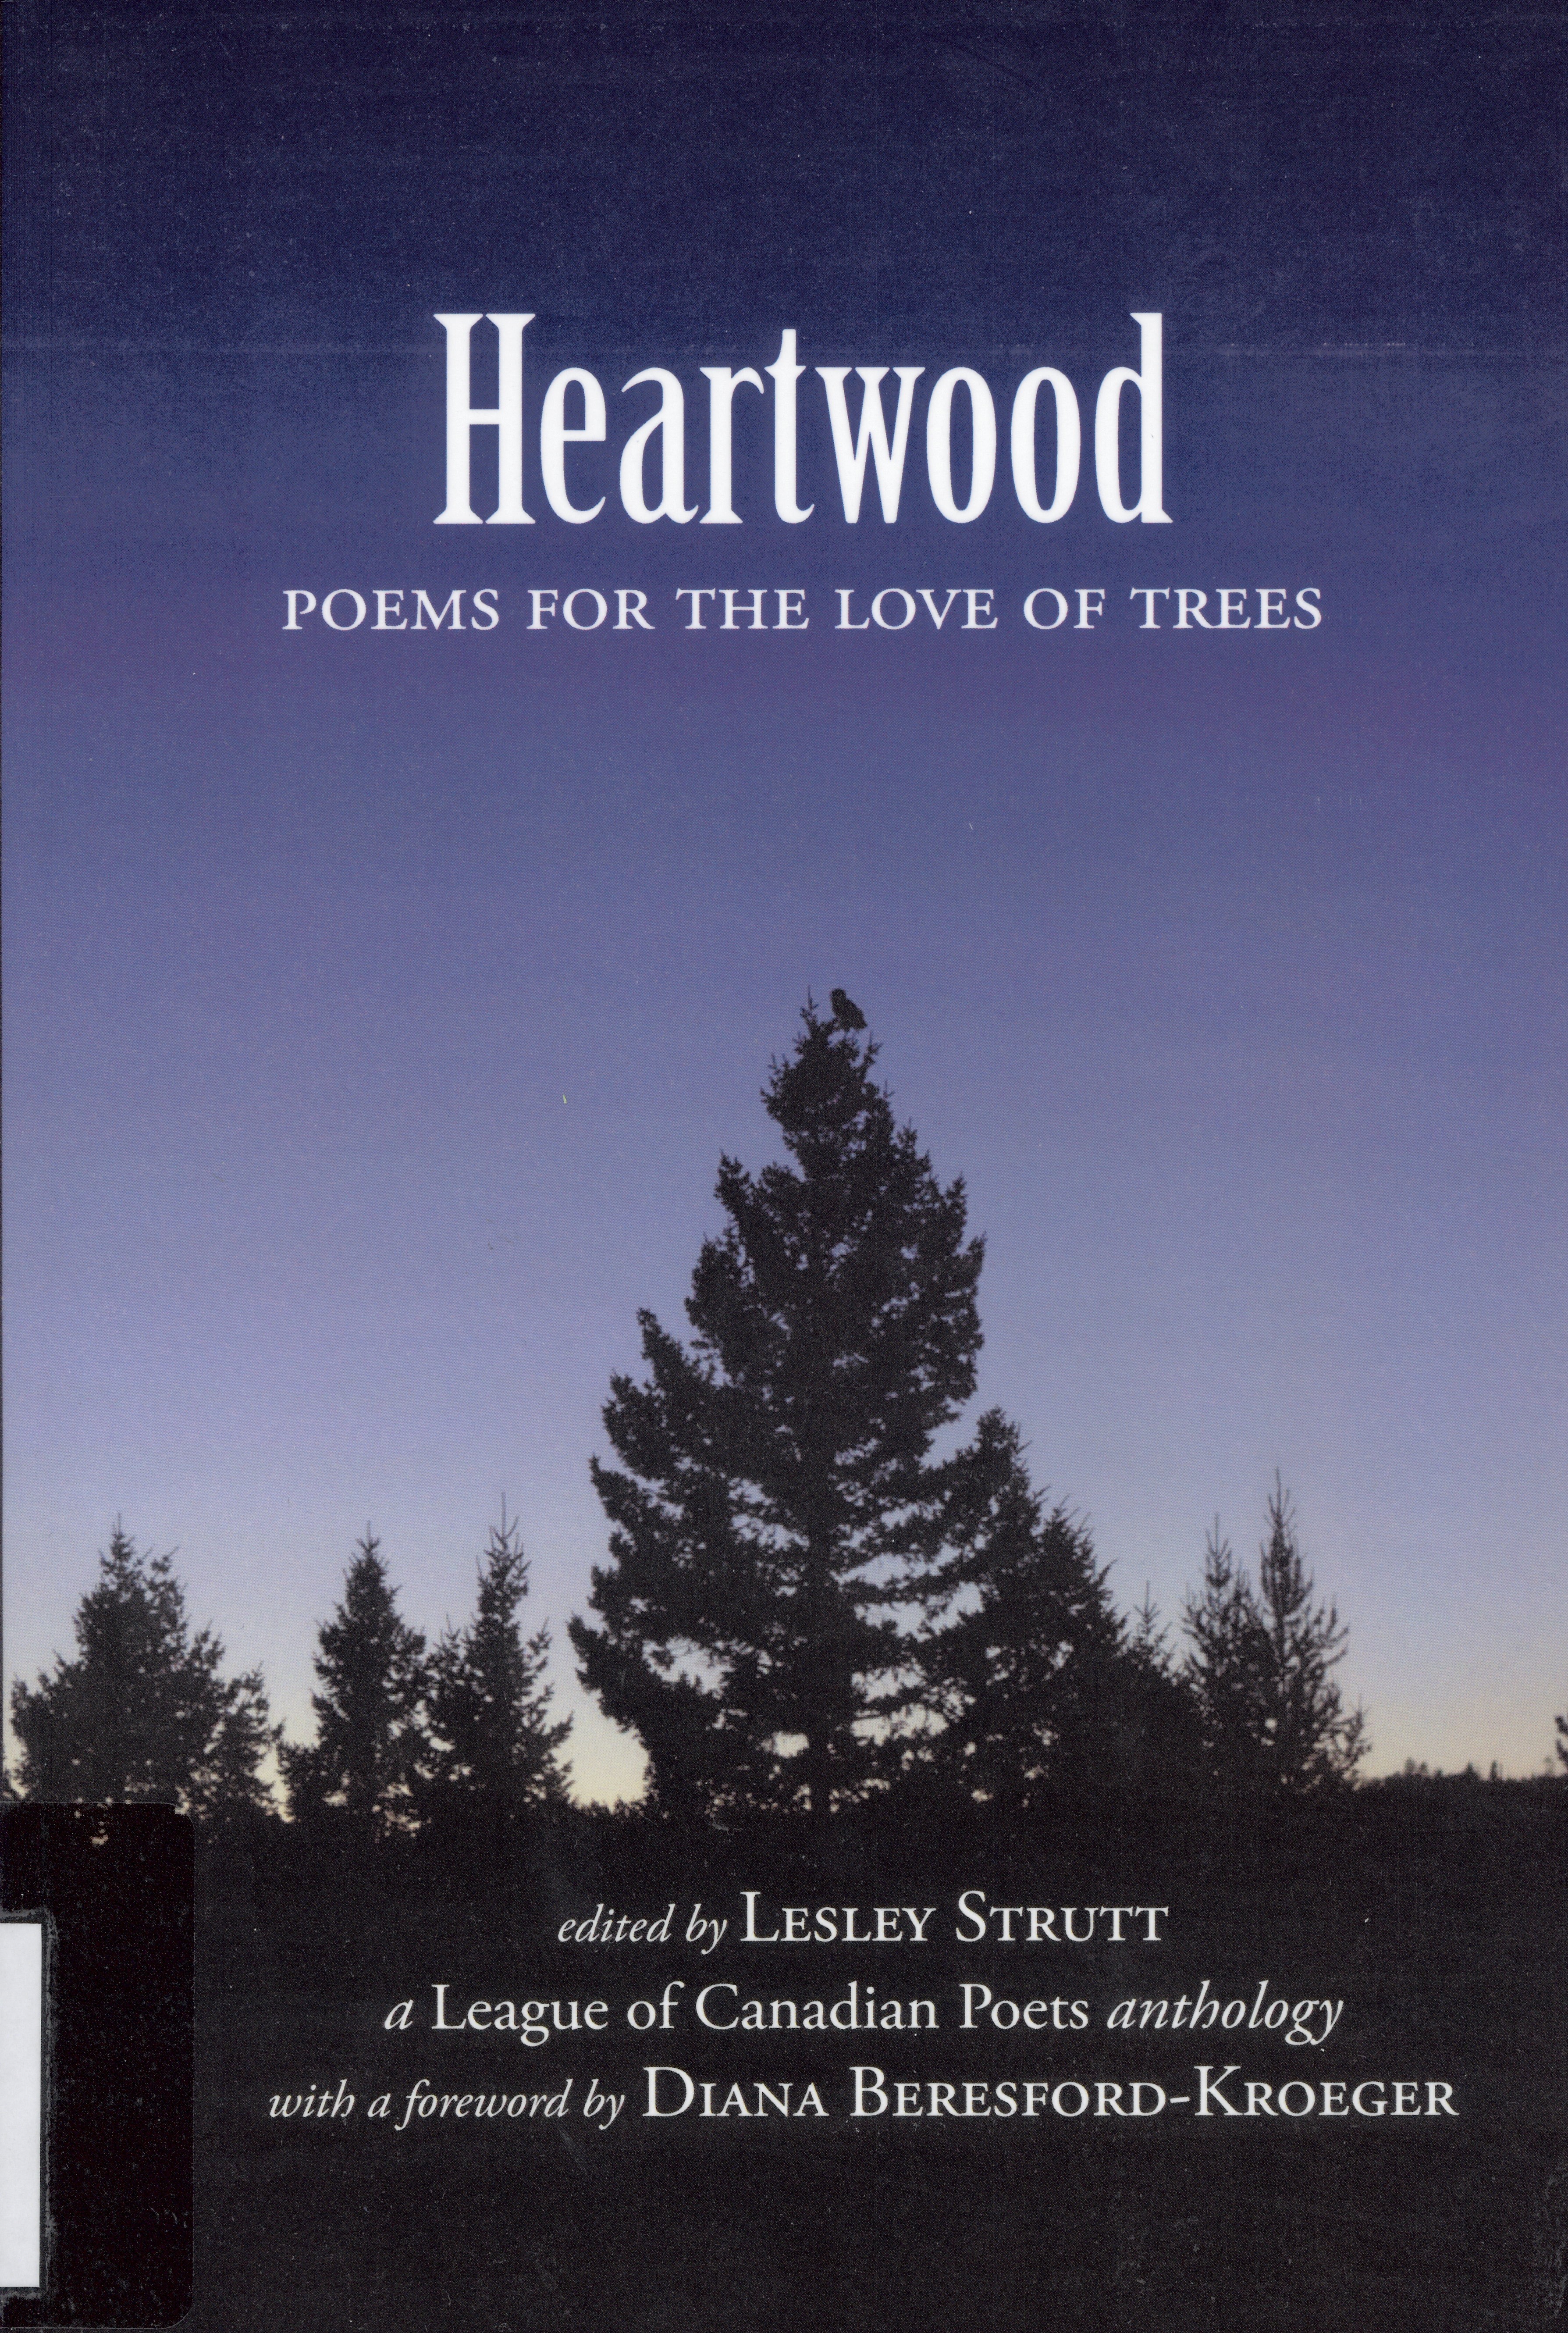 Heartwood : poems for the love of trees